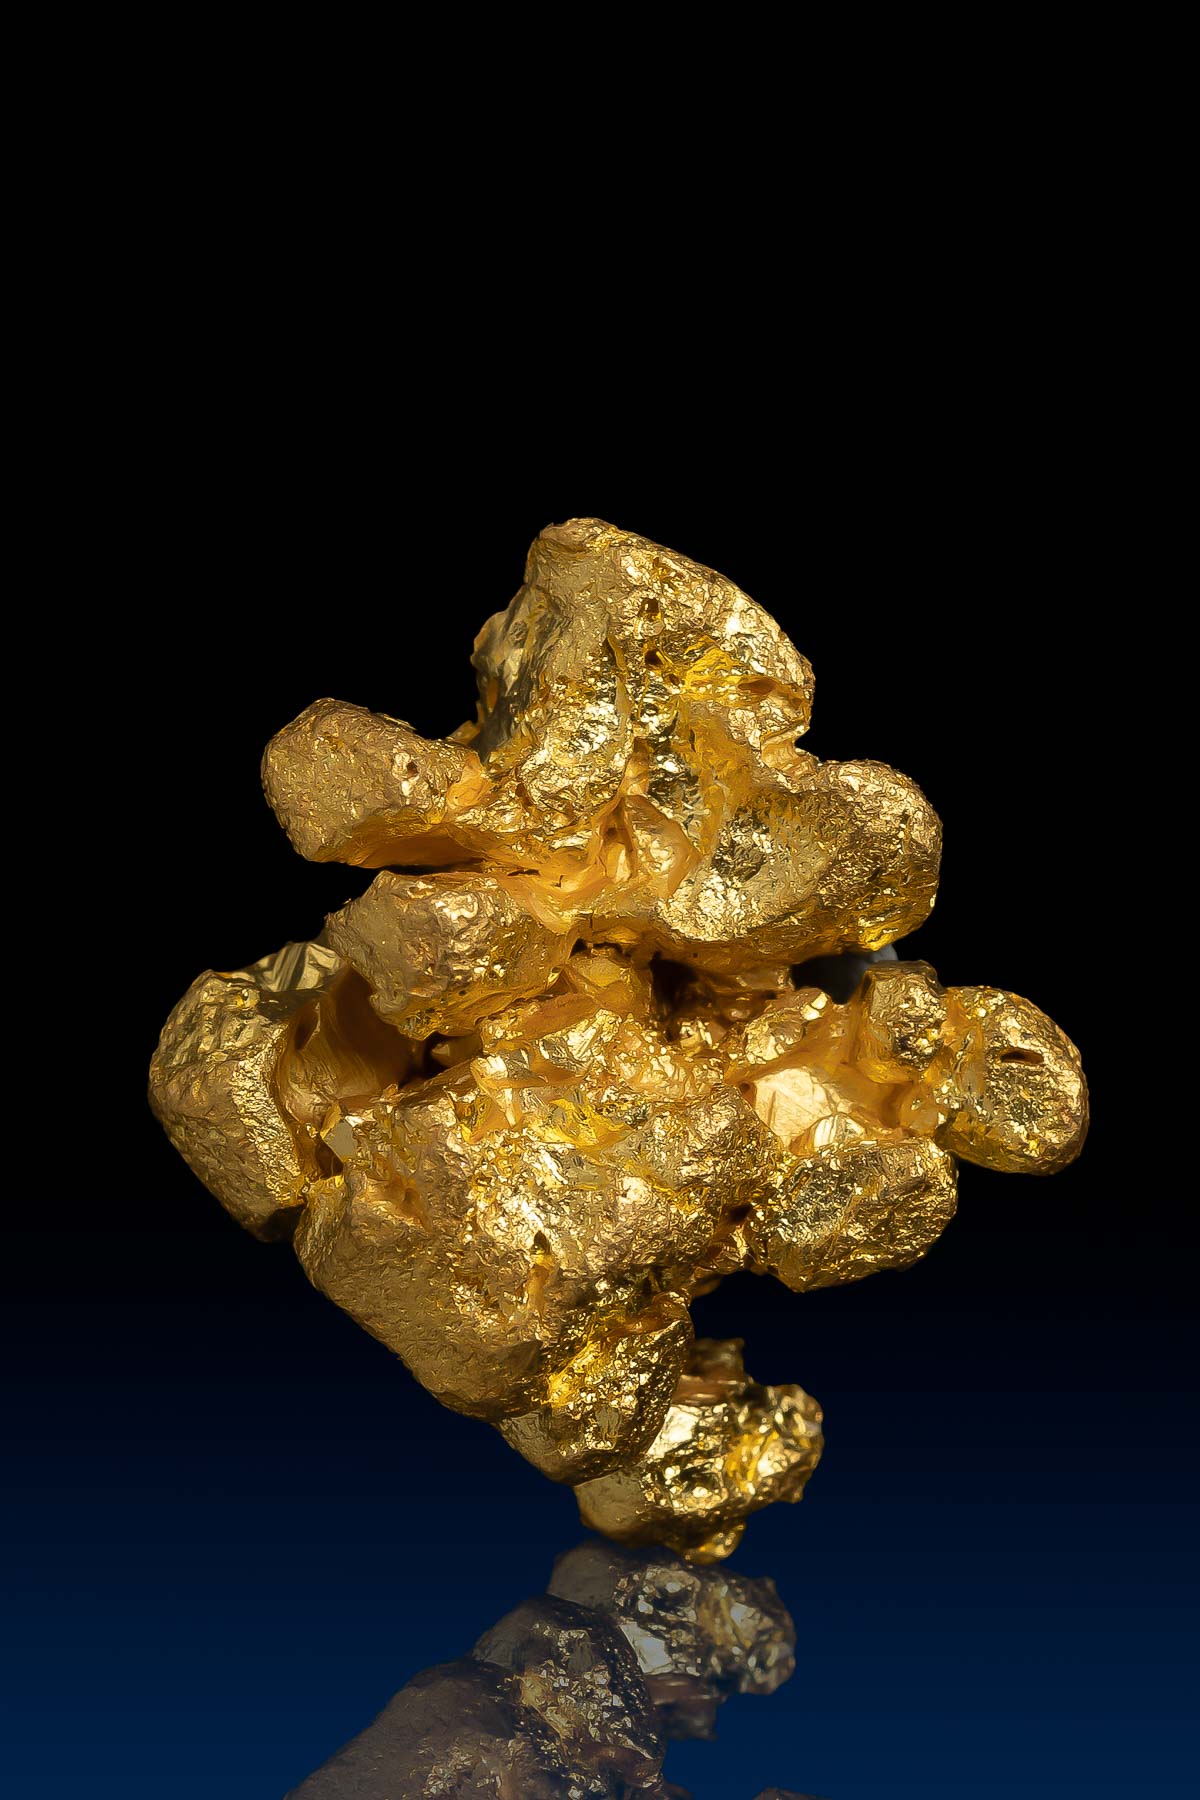 Outstanding "Pinwheel" Shaped Gold Crystal Nugget - Brazil